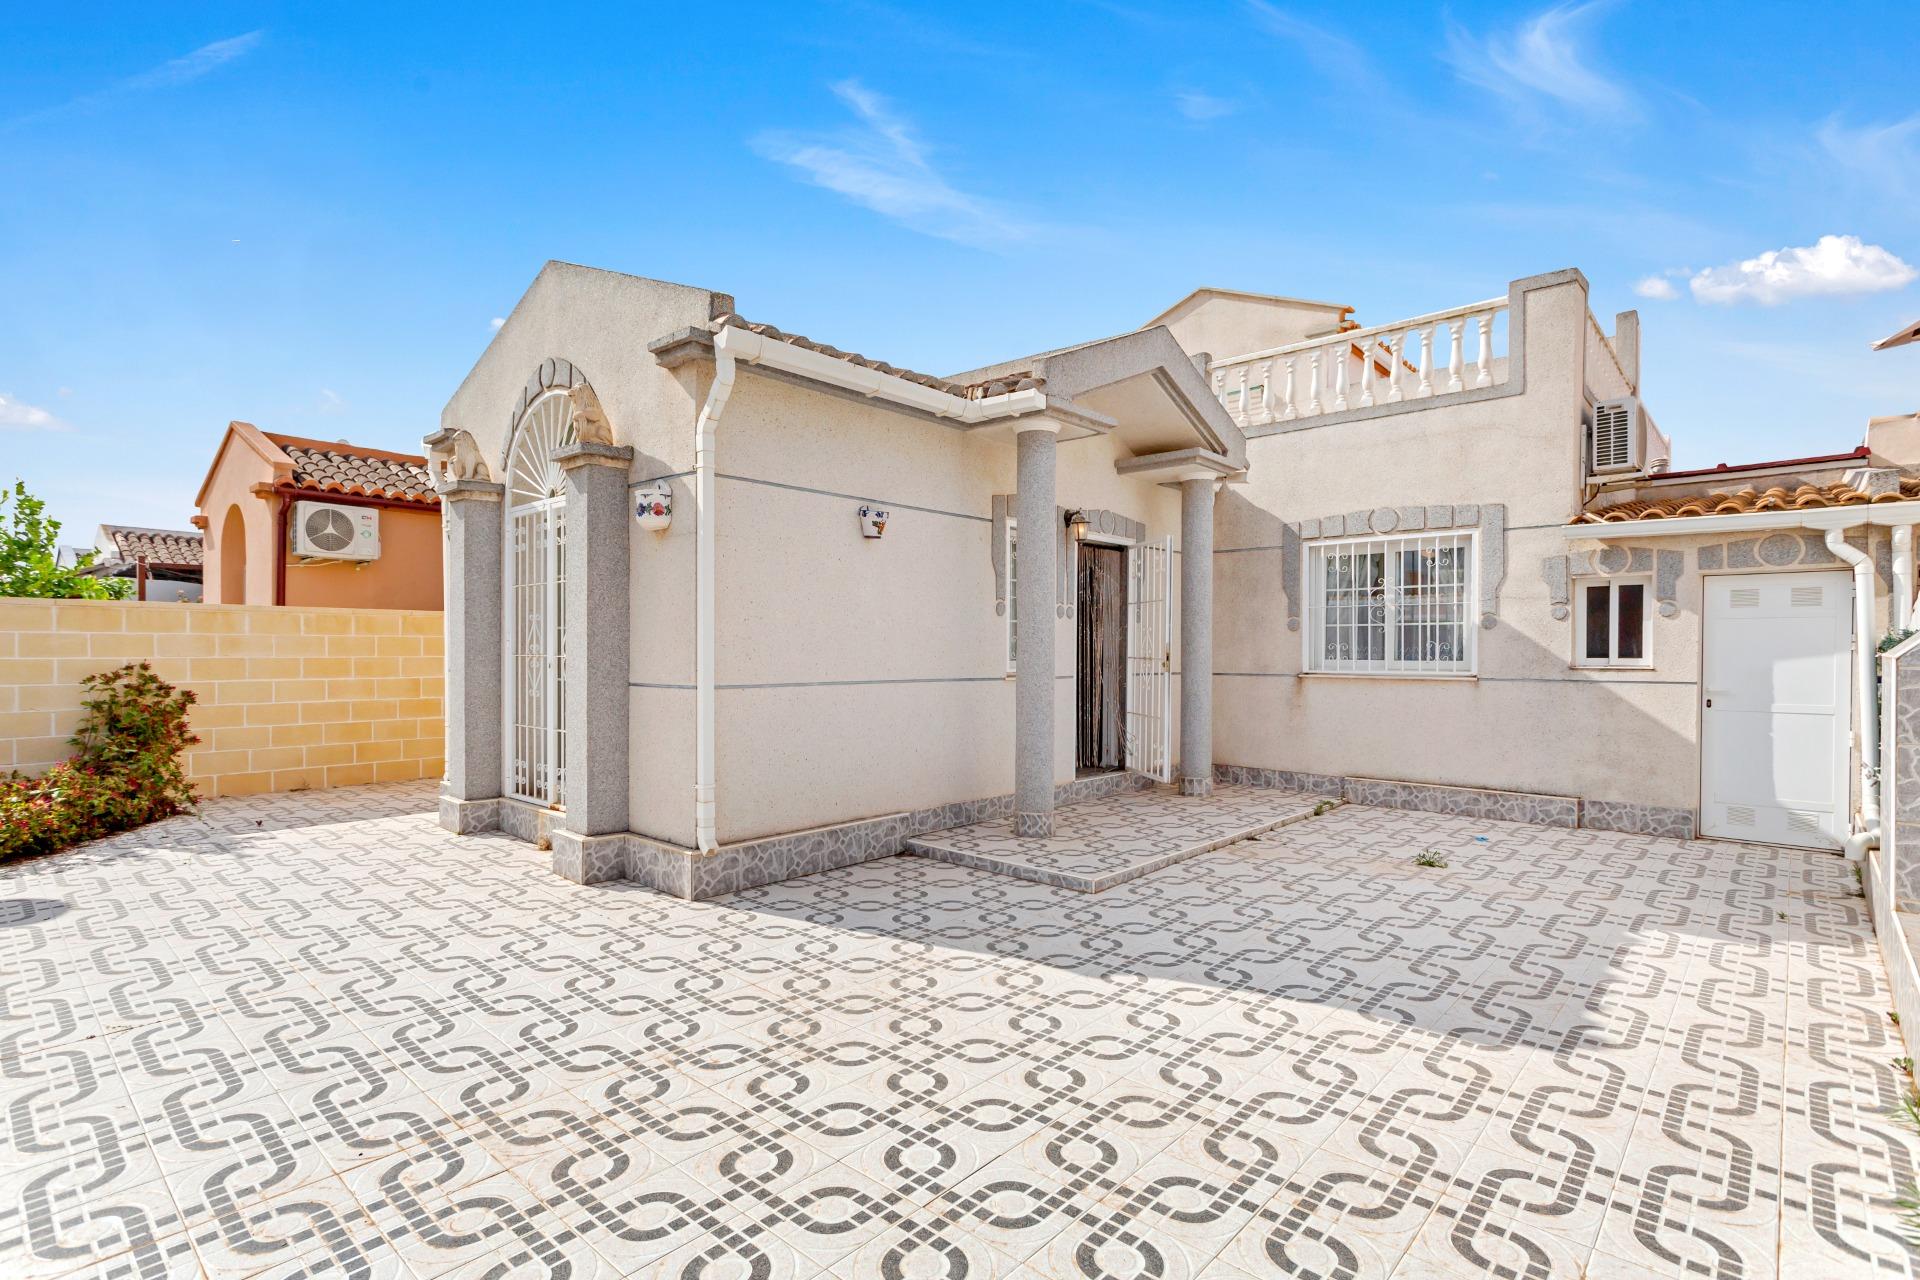 Charming semi-detached house for sale in a gated urbanization with a beautiful swimming pool in Torrevieja.